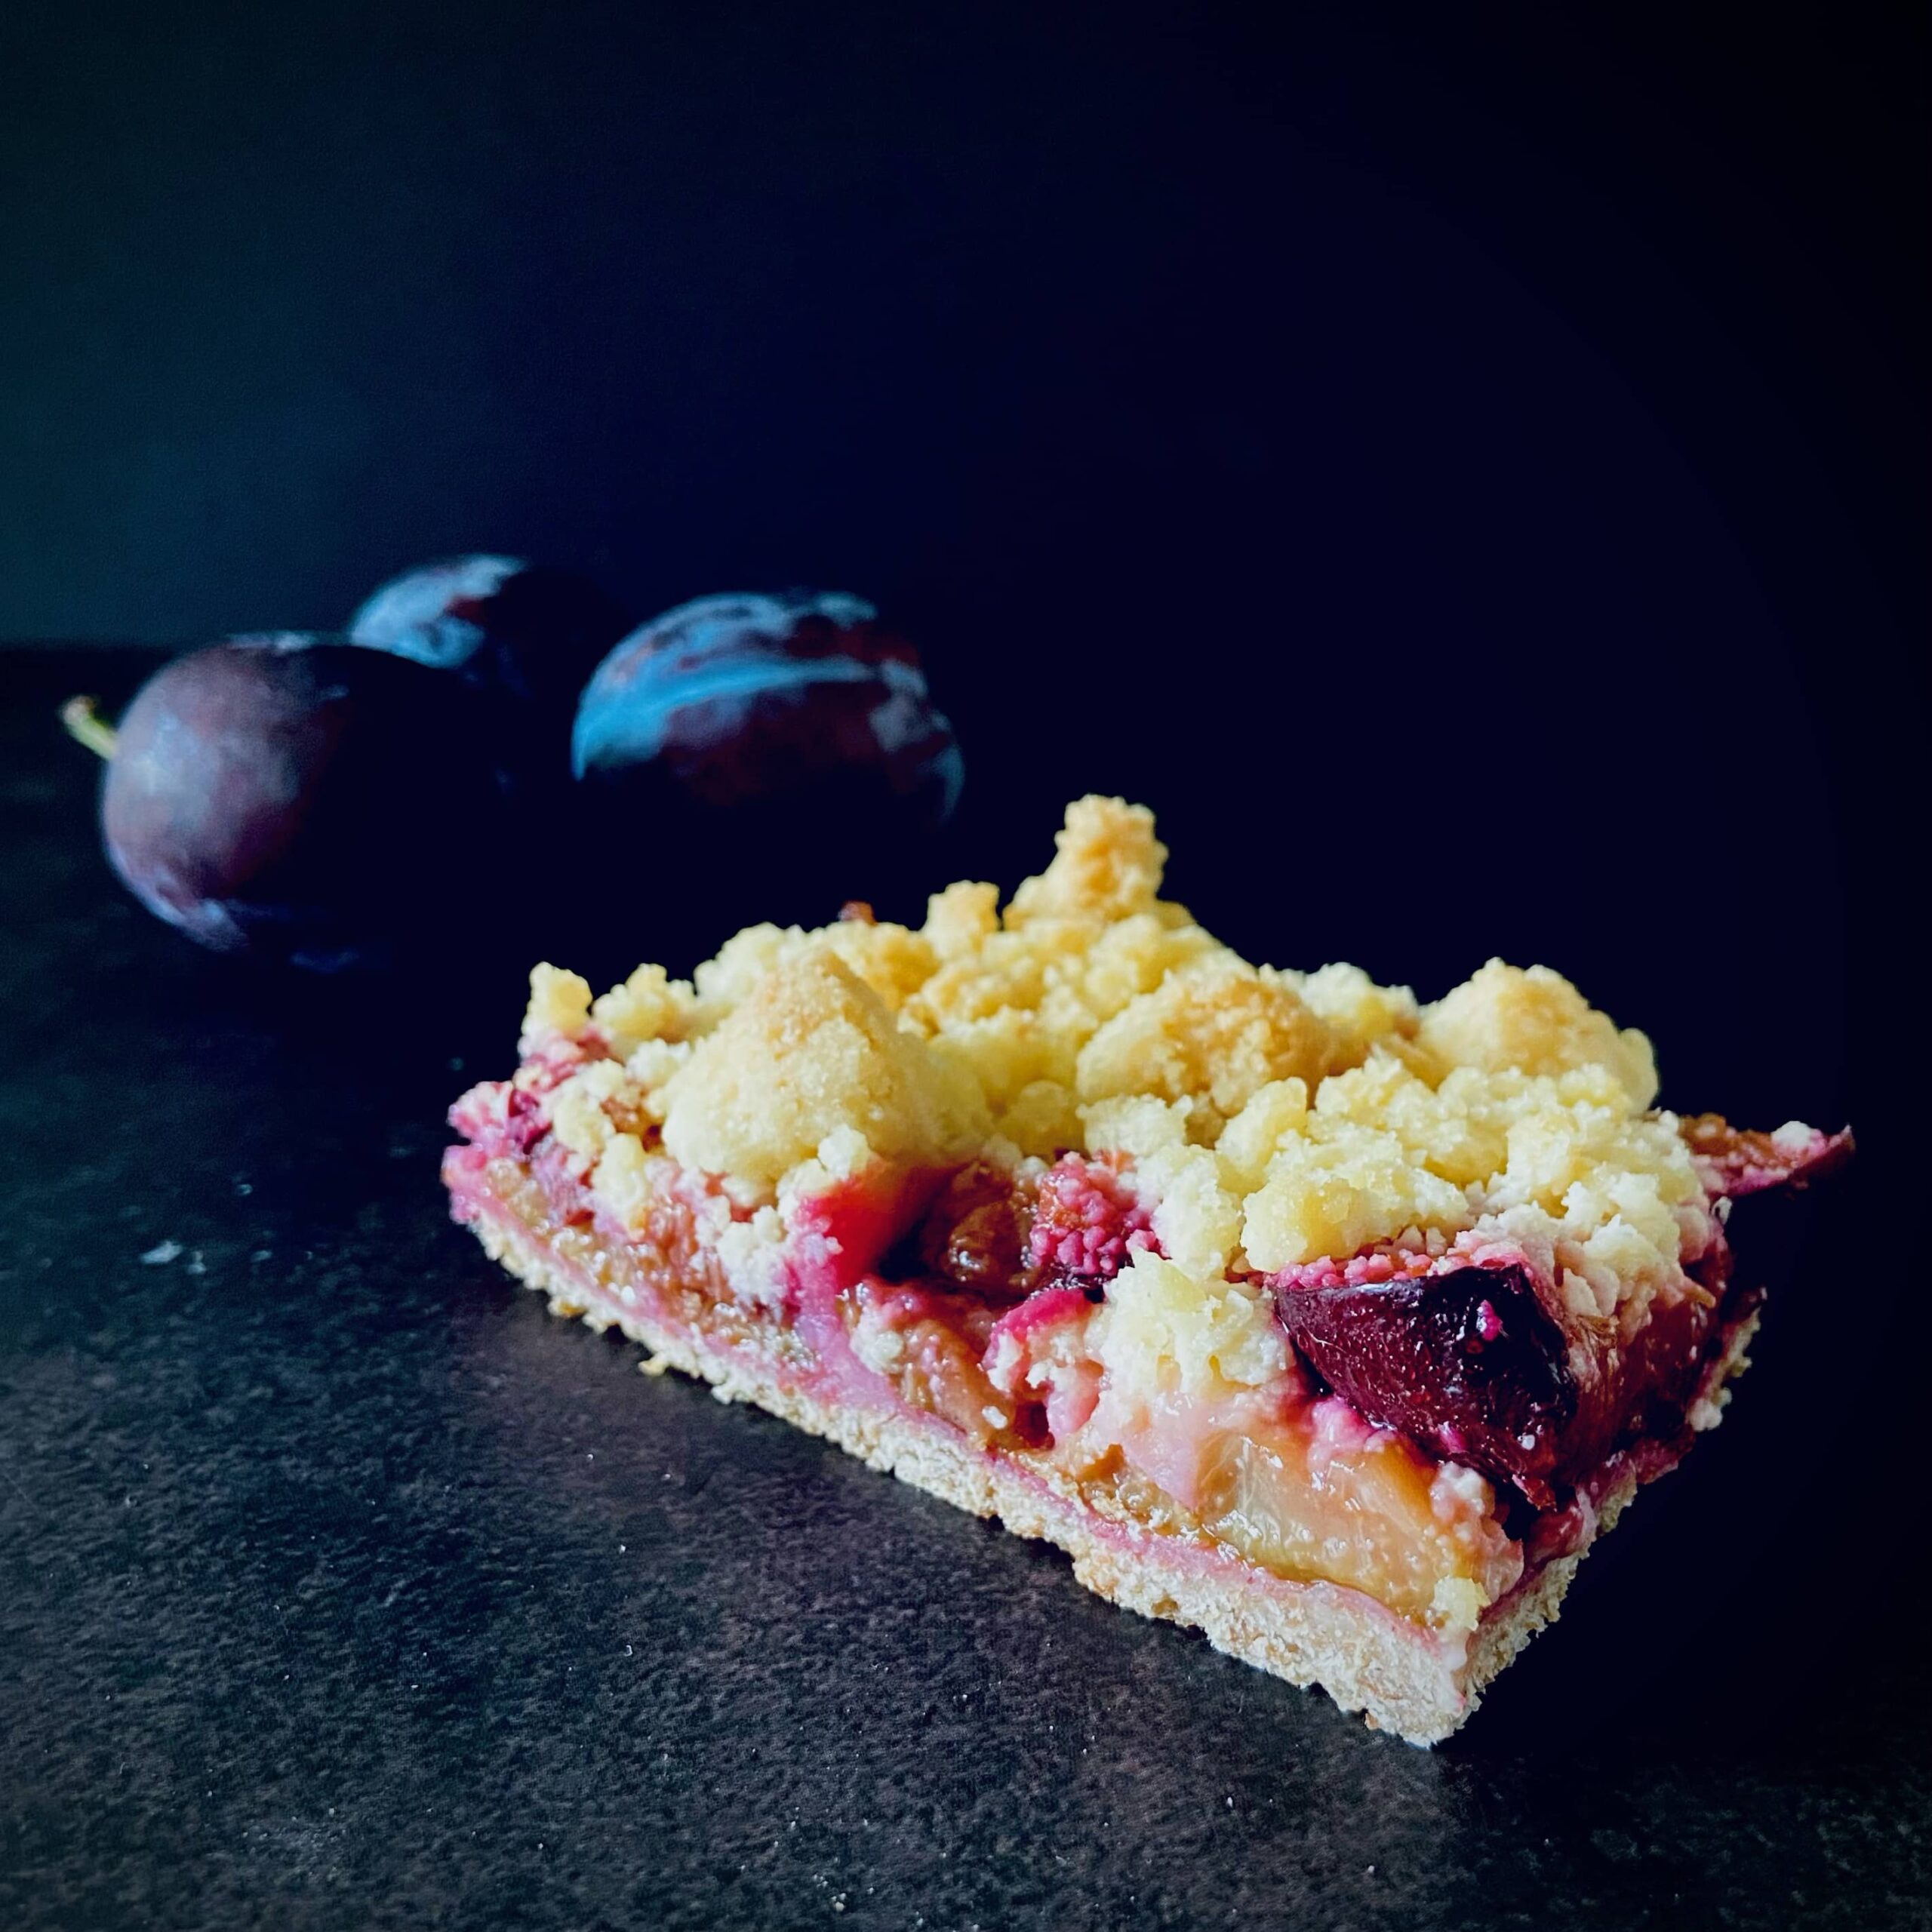 Plum cake with streusel (with spelt & eggfree)